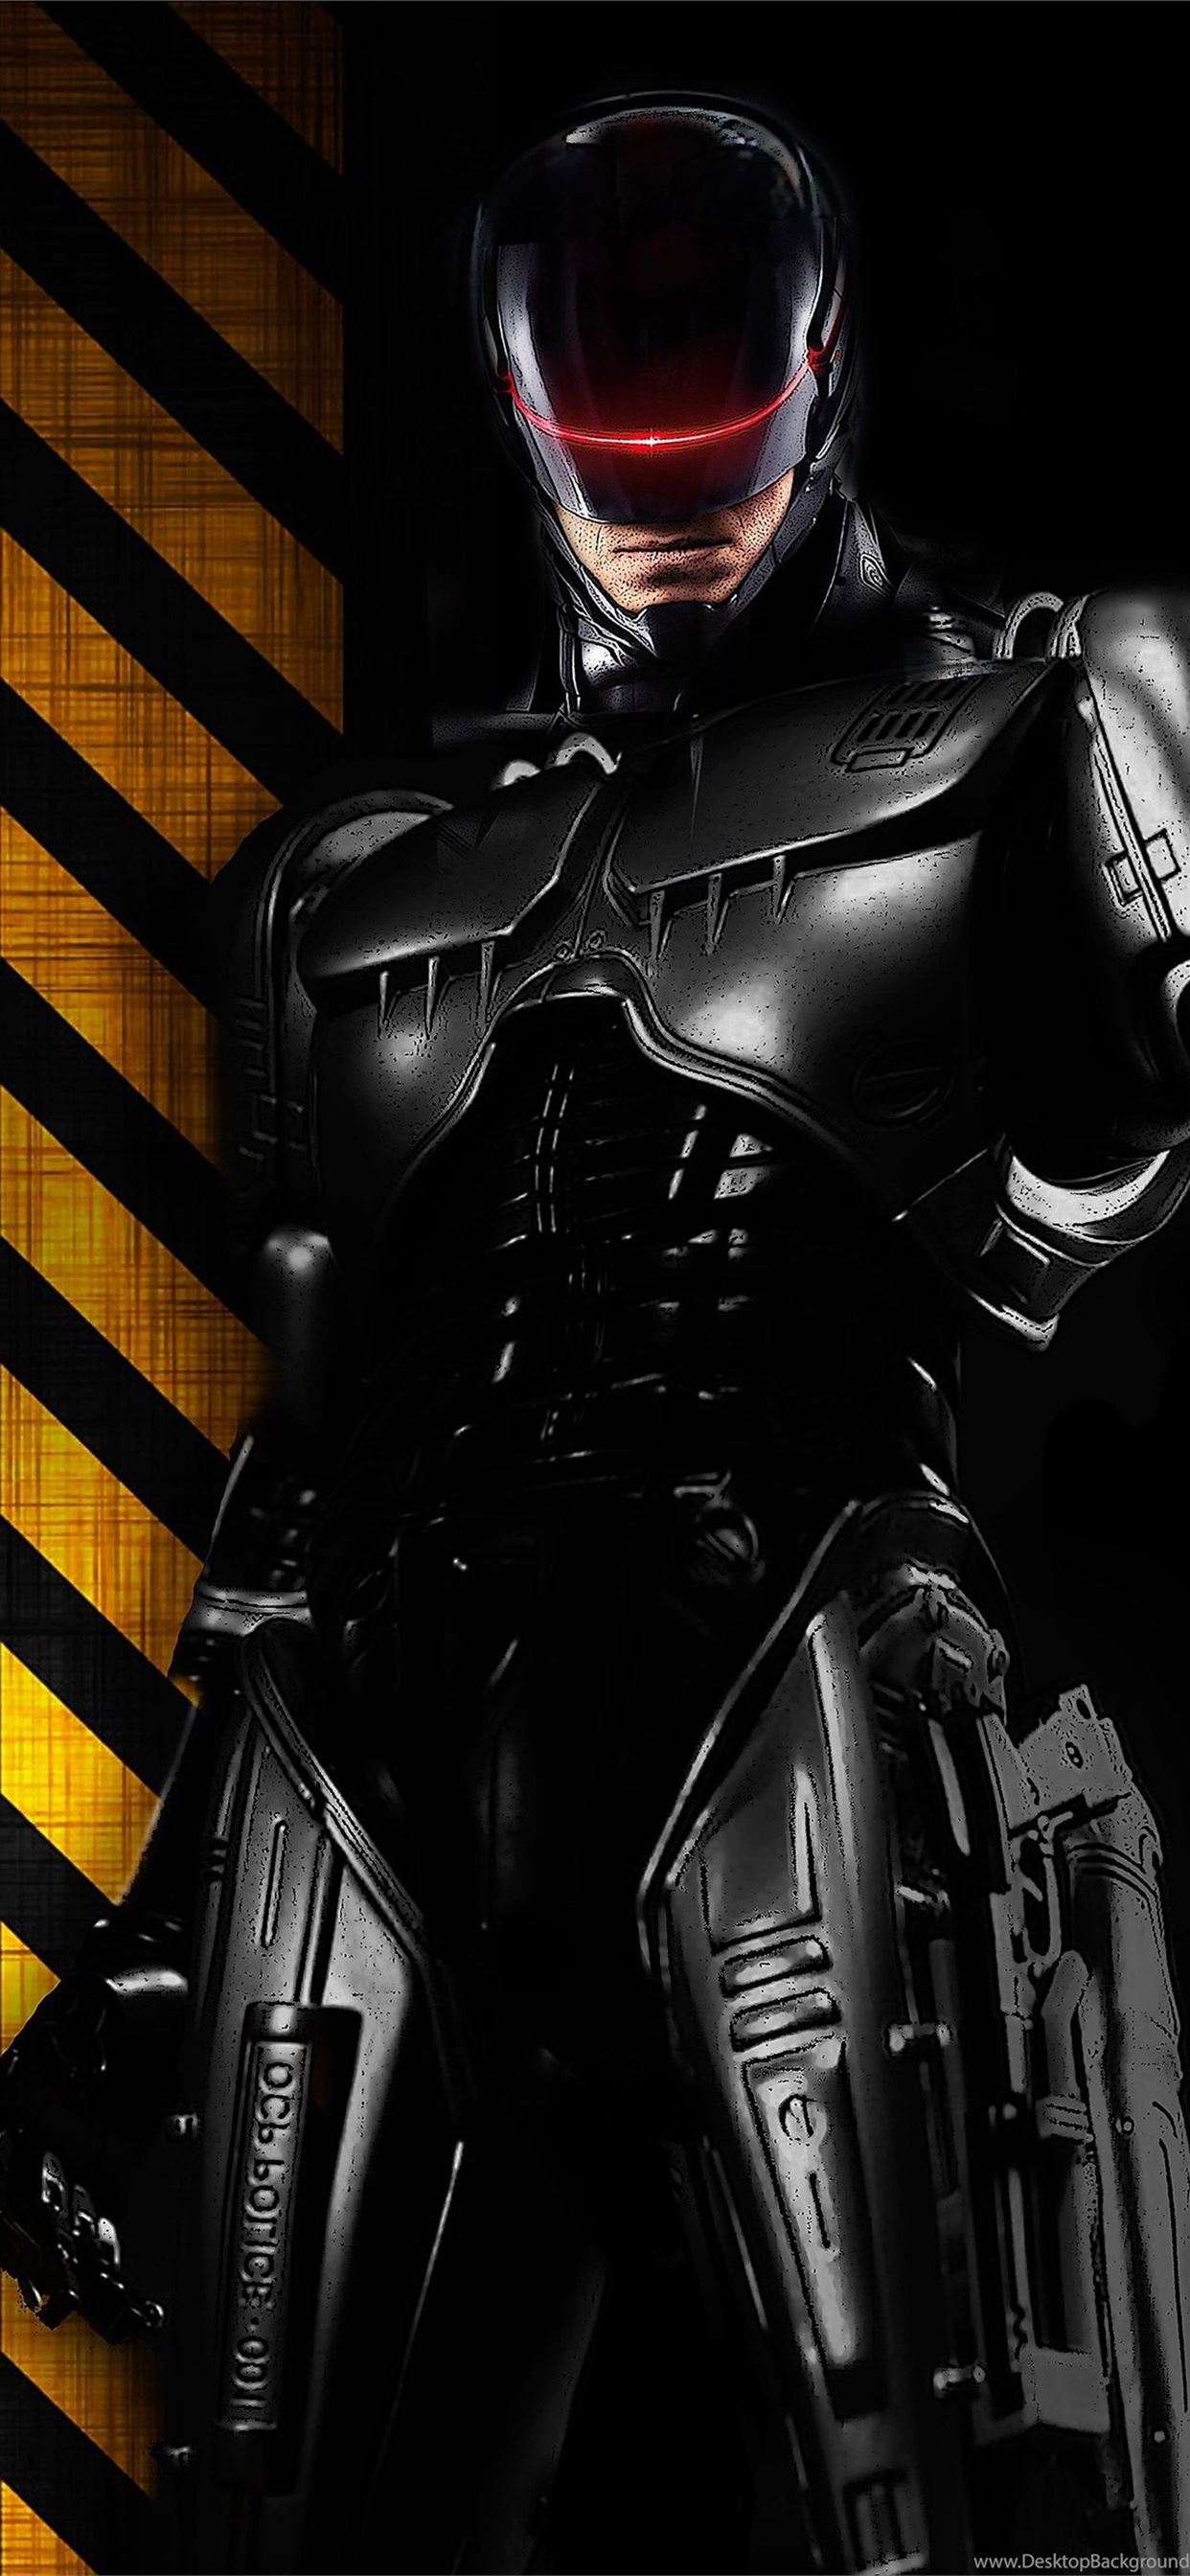 720x1280 RoboCop Wallpapers for Mobile Phone HD